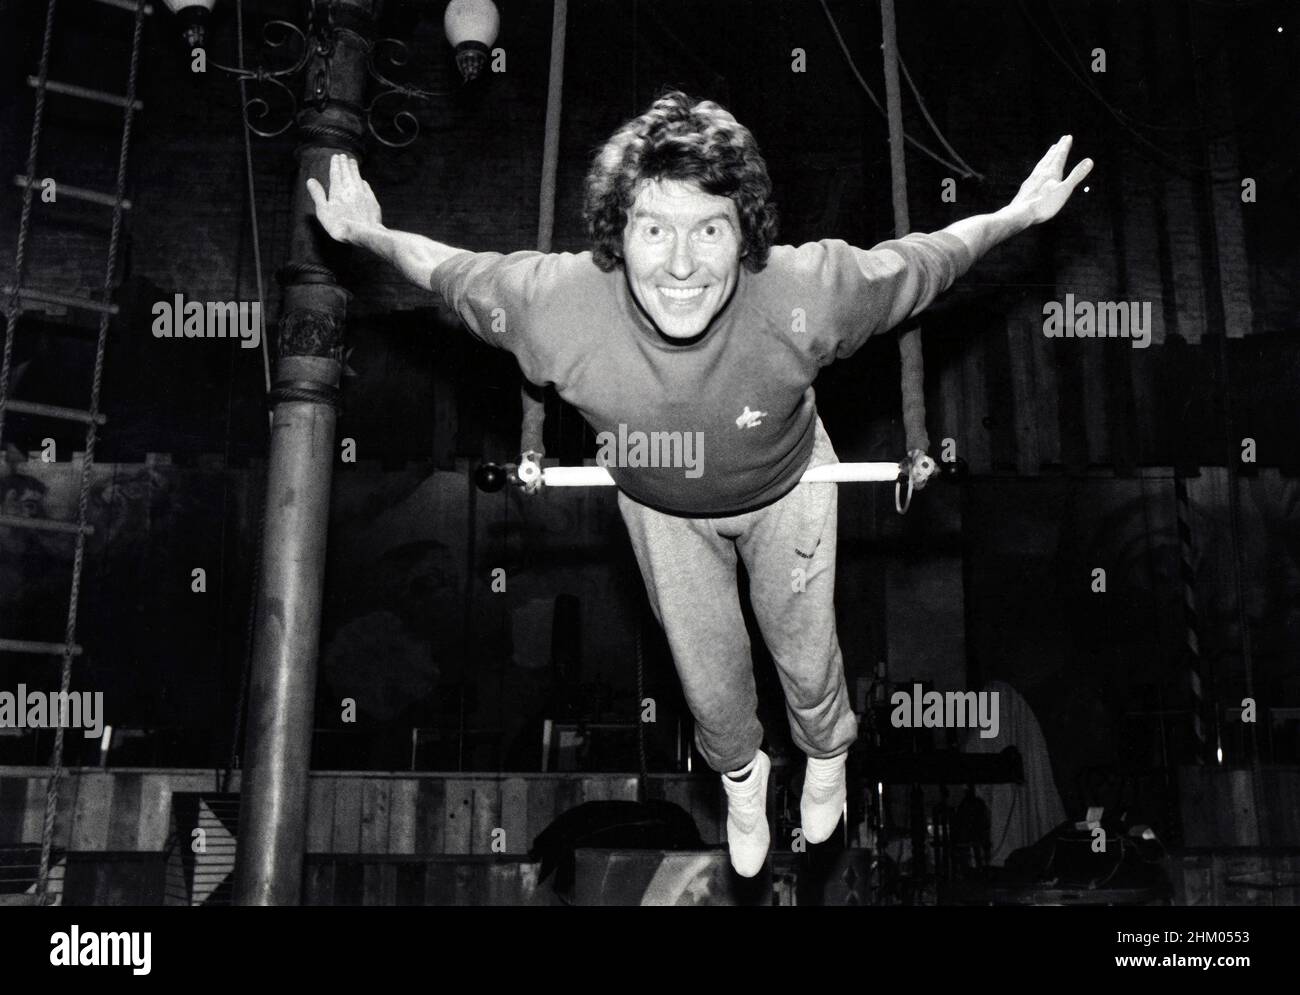 MICHAEL CRAWFORD prepares for his starring role in the London theater production of Barnum by training in New York with the Big Apple Circus School. In Manhattan, 1981. Stock Photo